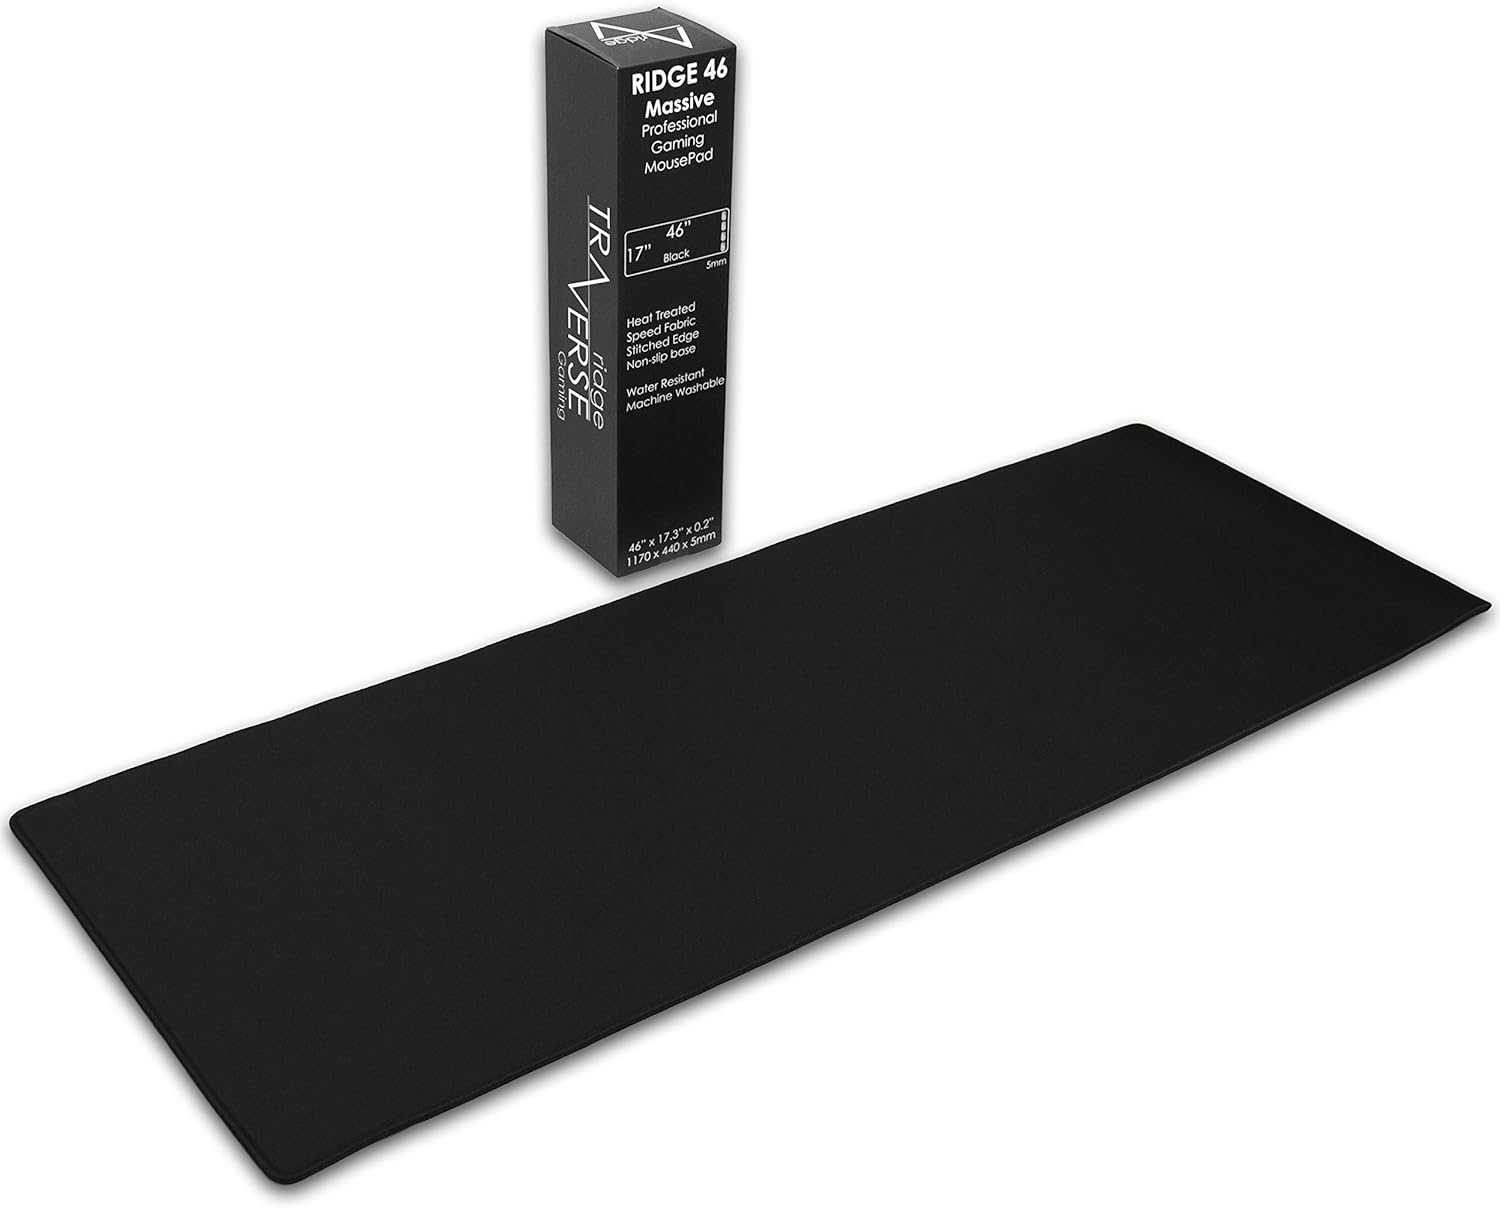 Traverse Ridge Gaming Mouse Pad (5mm) Massive 46 inch | 46x17.3x0.20 Extra Thick | Black | Stitched Edge, Large Washable Desk Mat